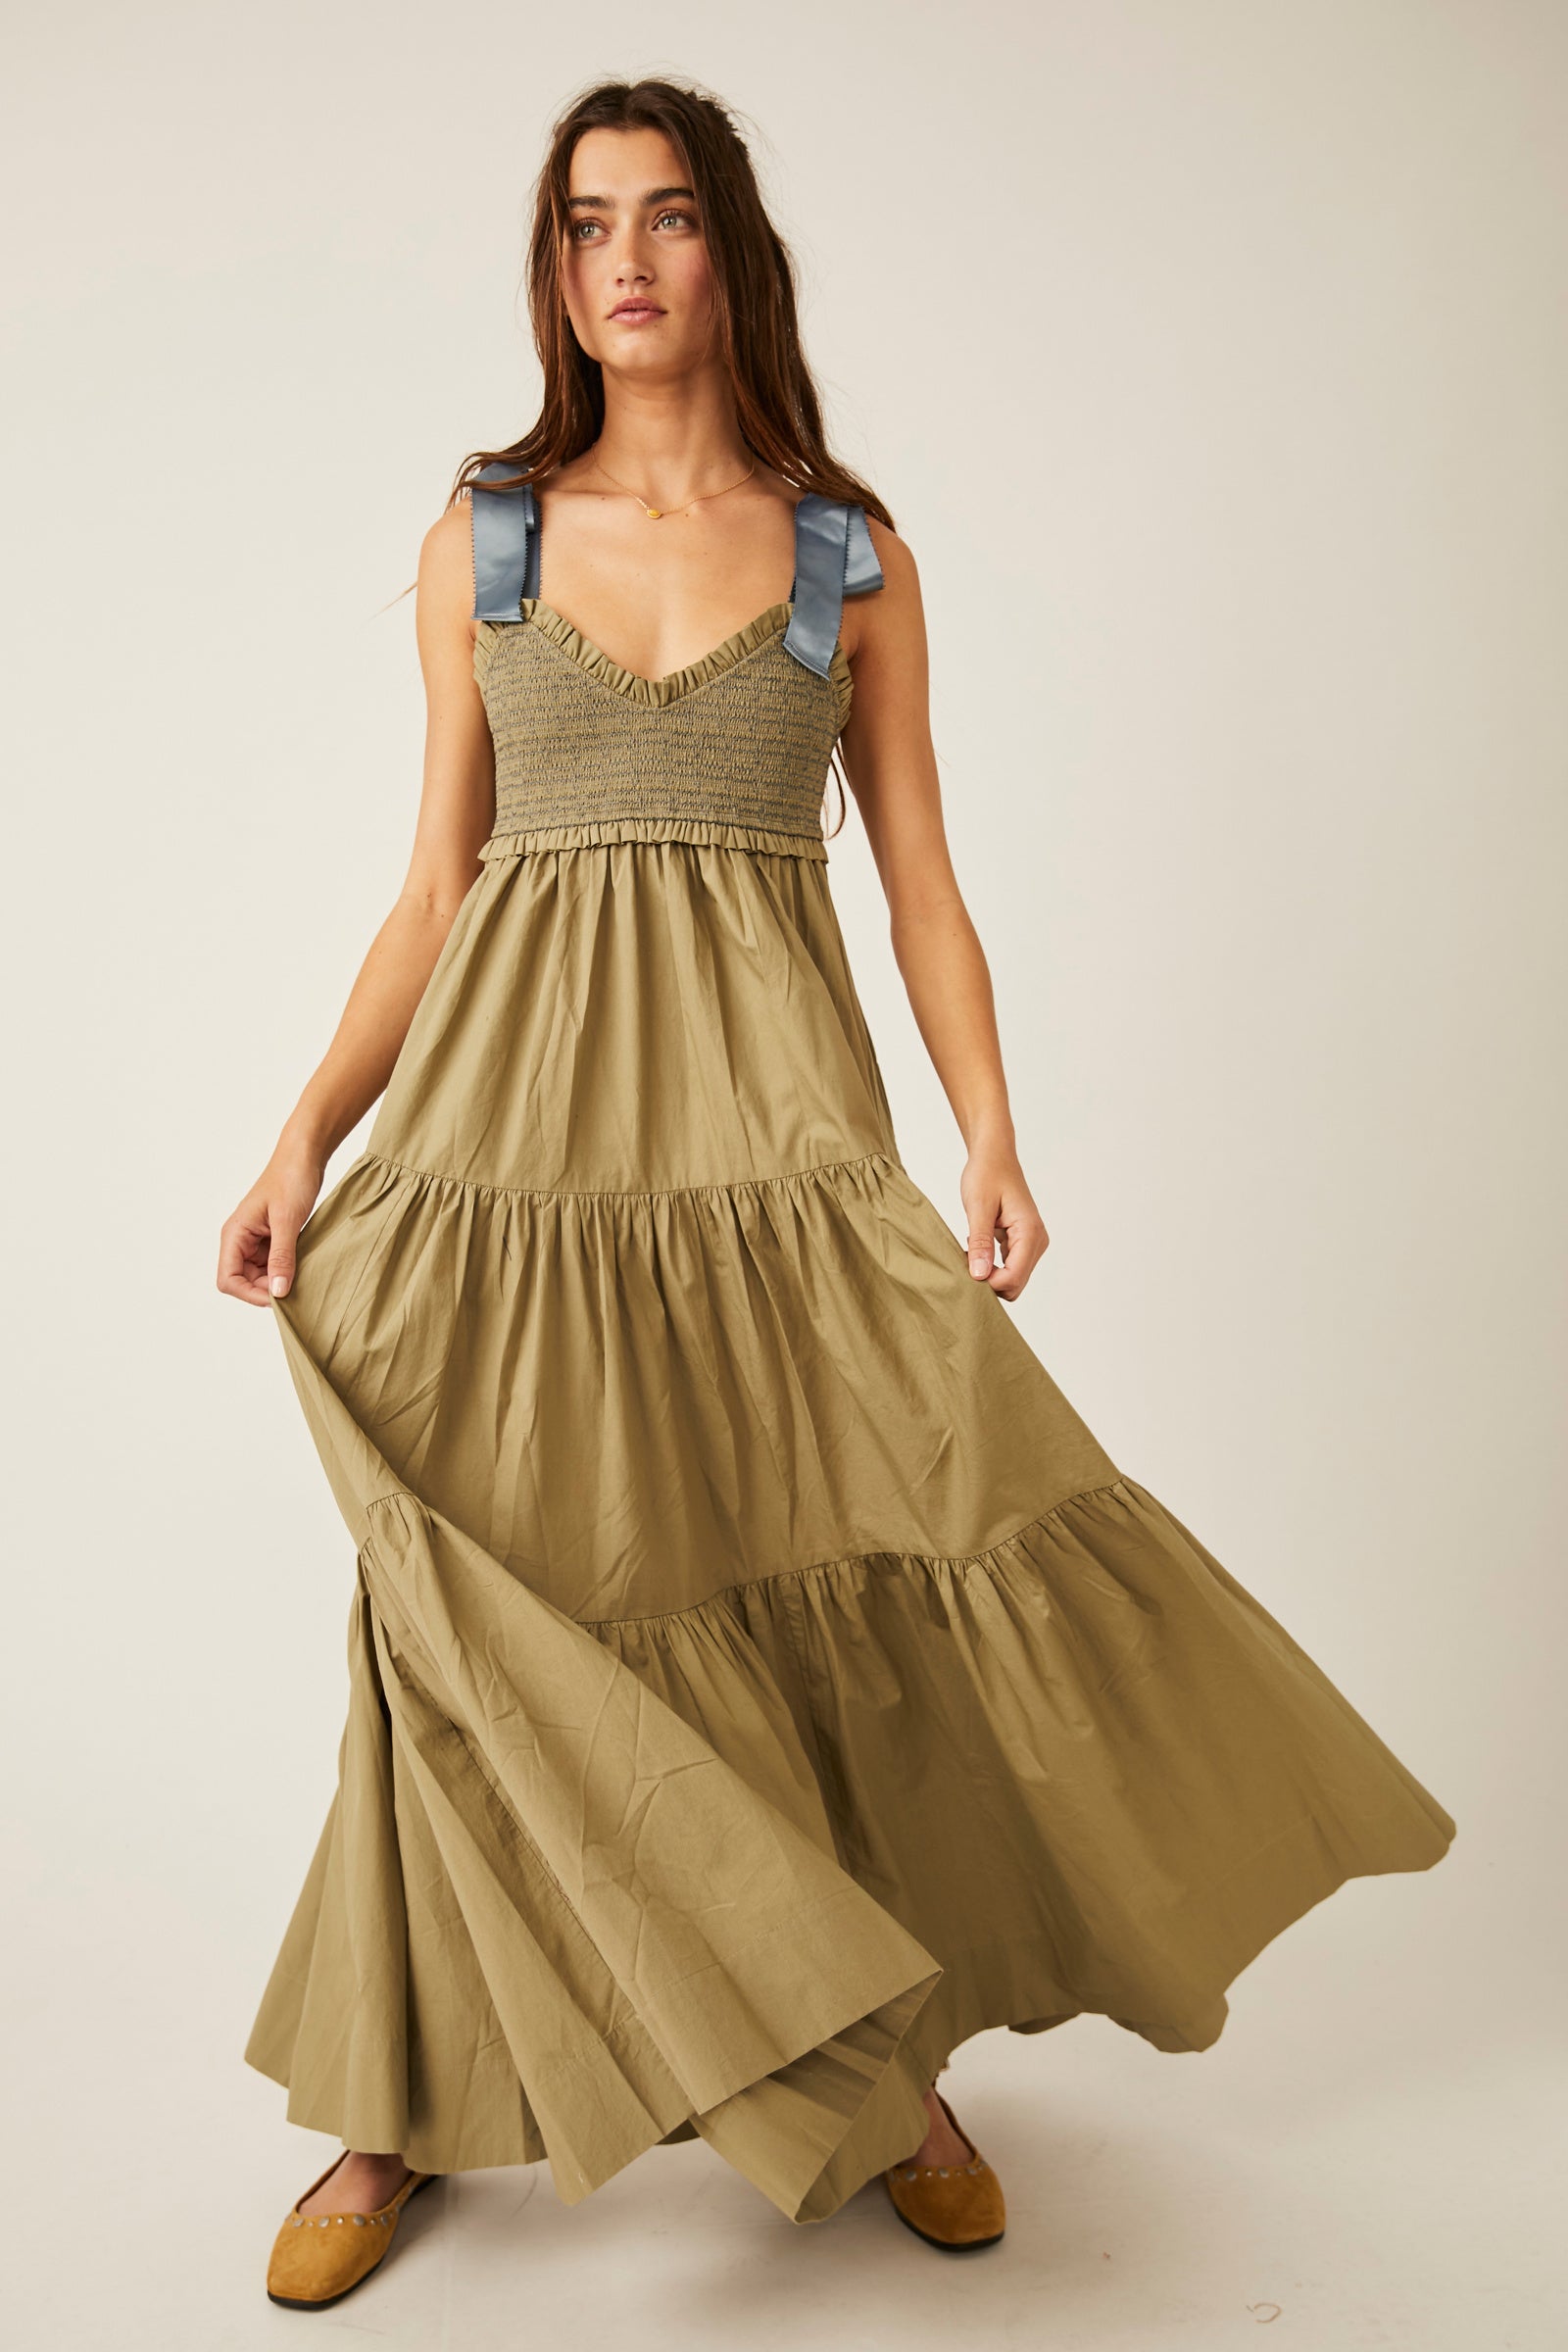 FREE PEOPLE BLUEBELL SOLID MAXI DRESS IN SERPENT